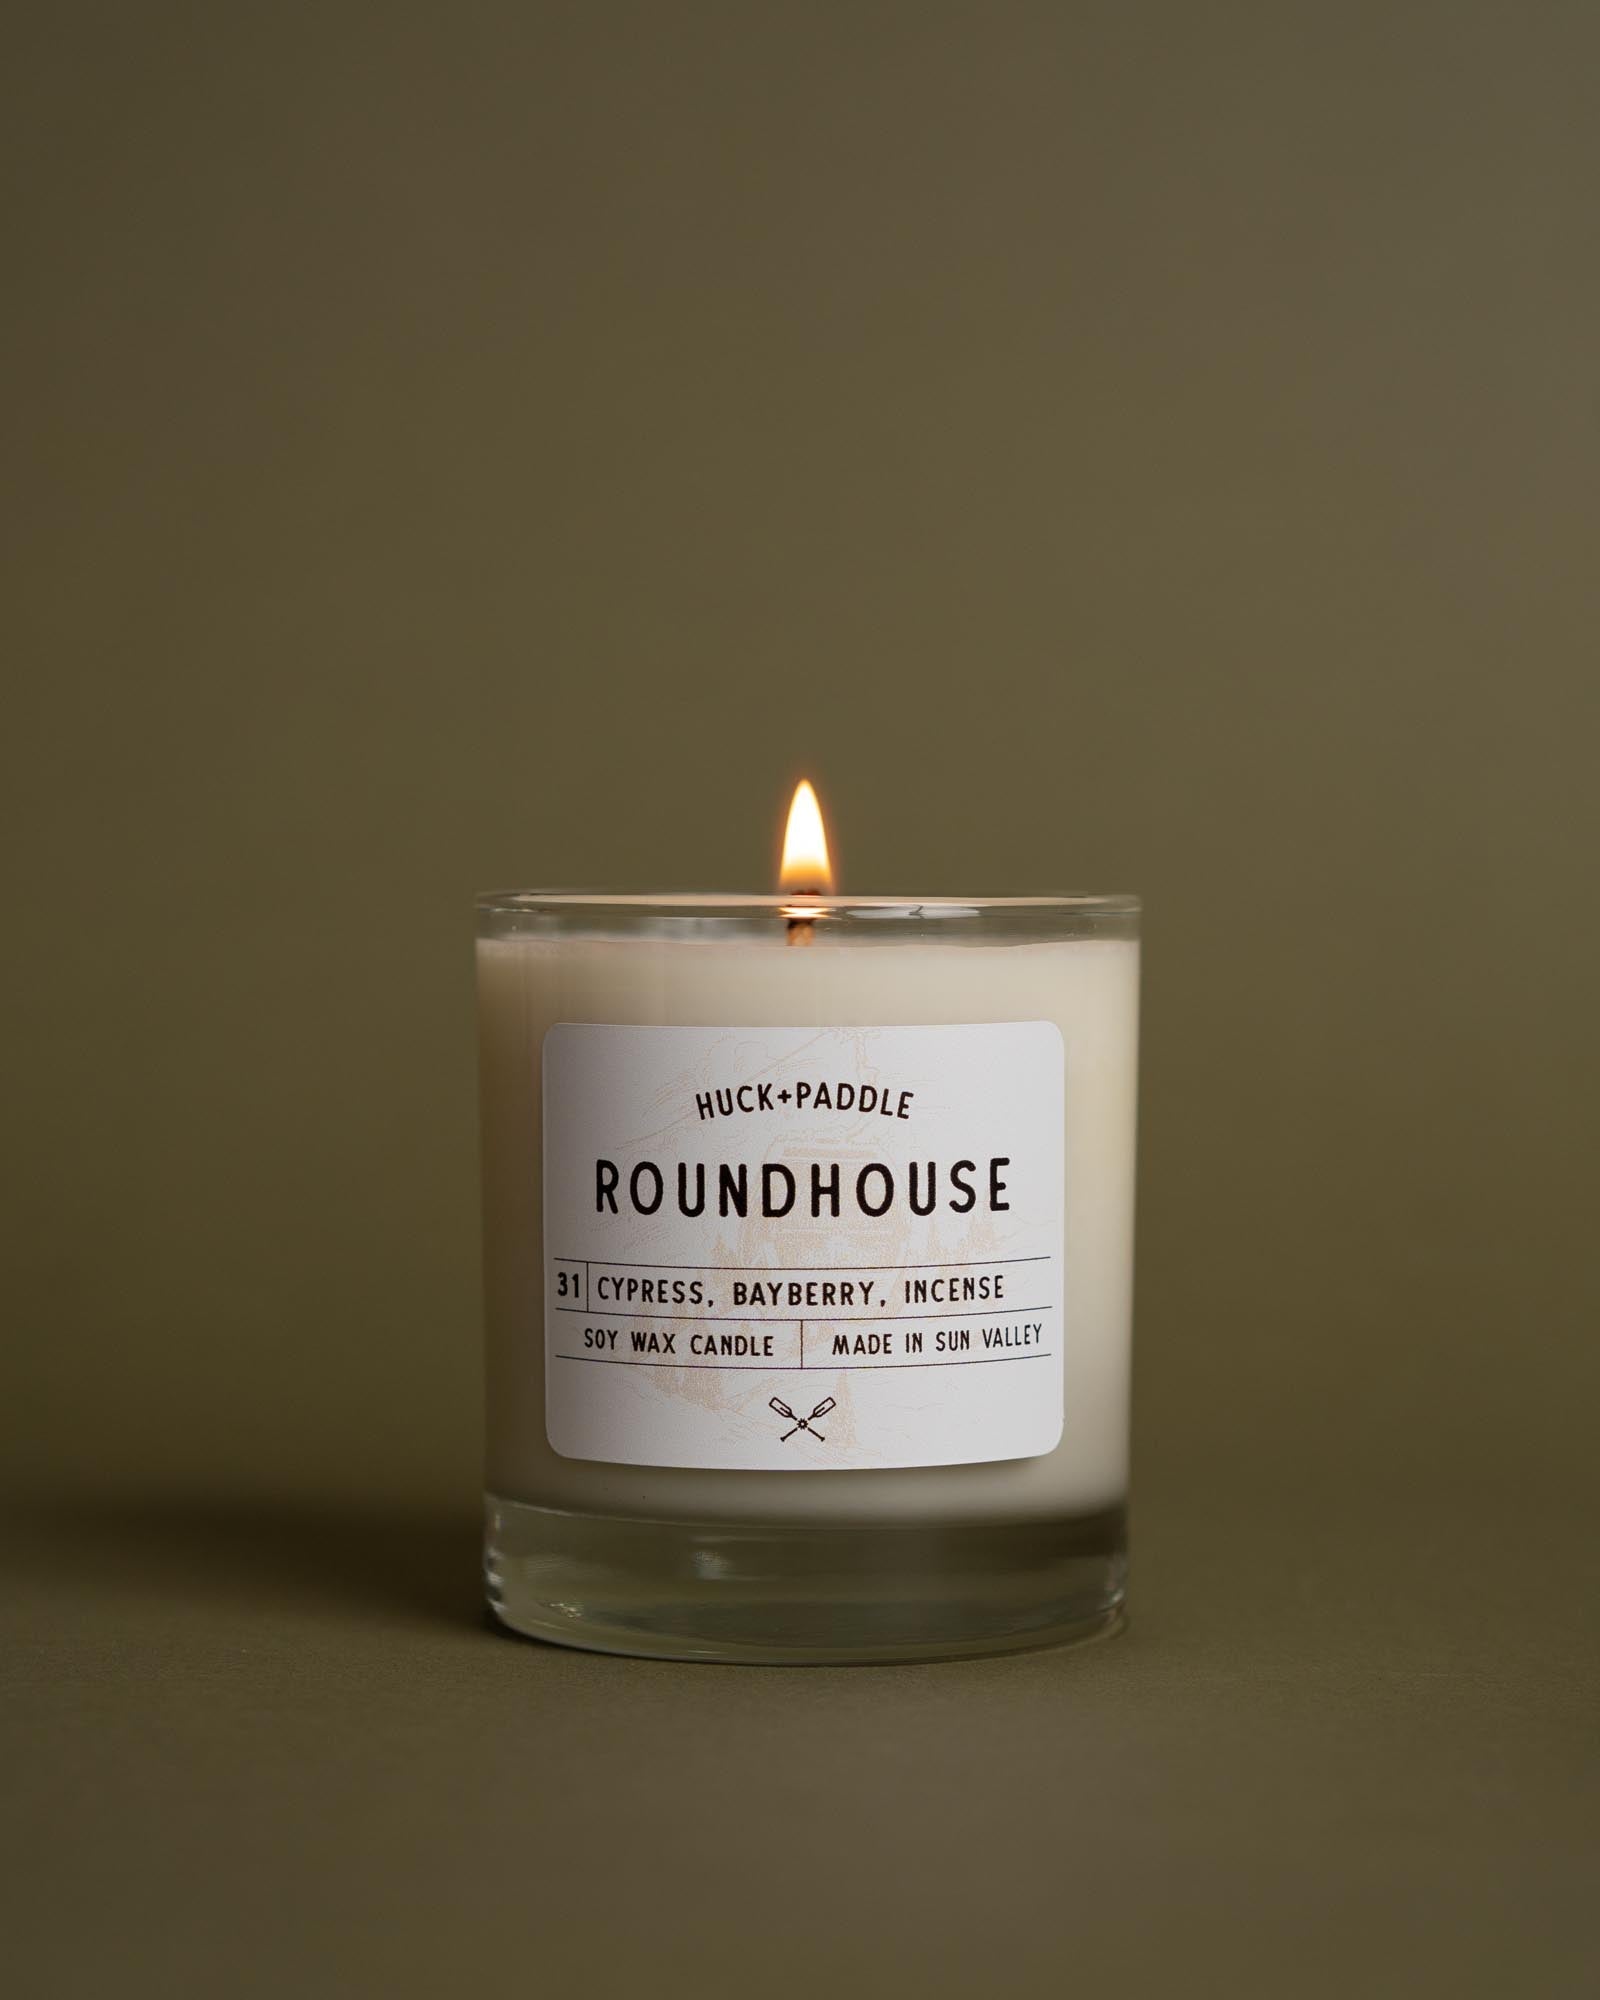 Roundhouse - Huck & Paddle